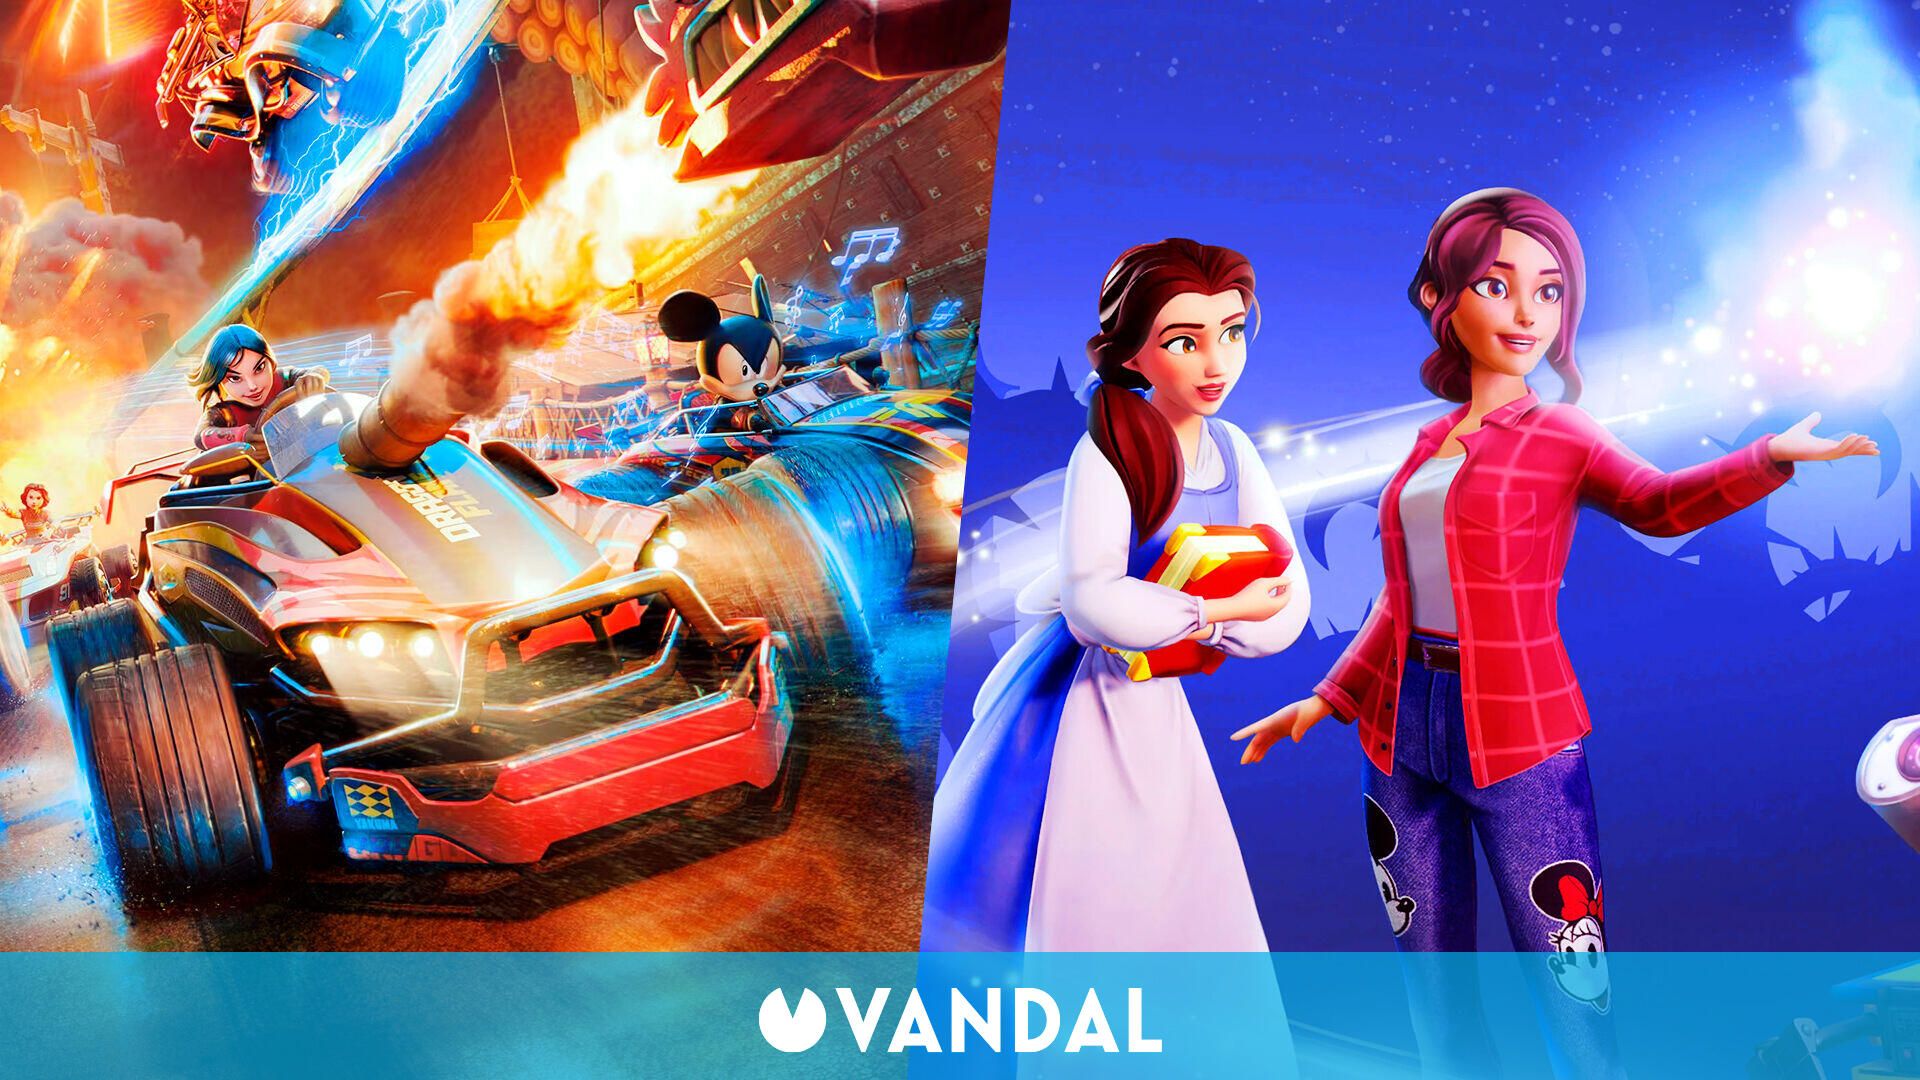 Gameloft shows off the new Disney Speedstorm and Disney Dreamlight Valley